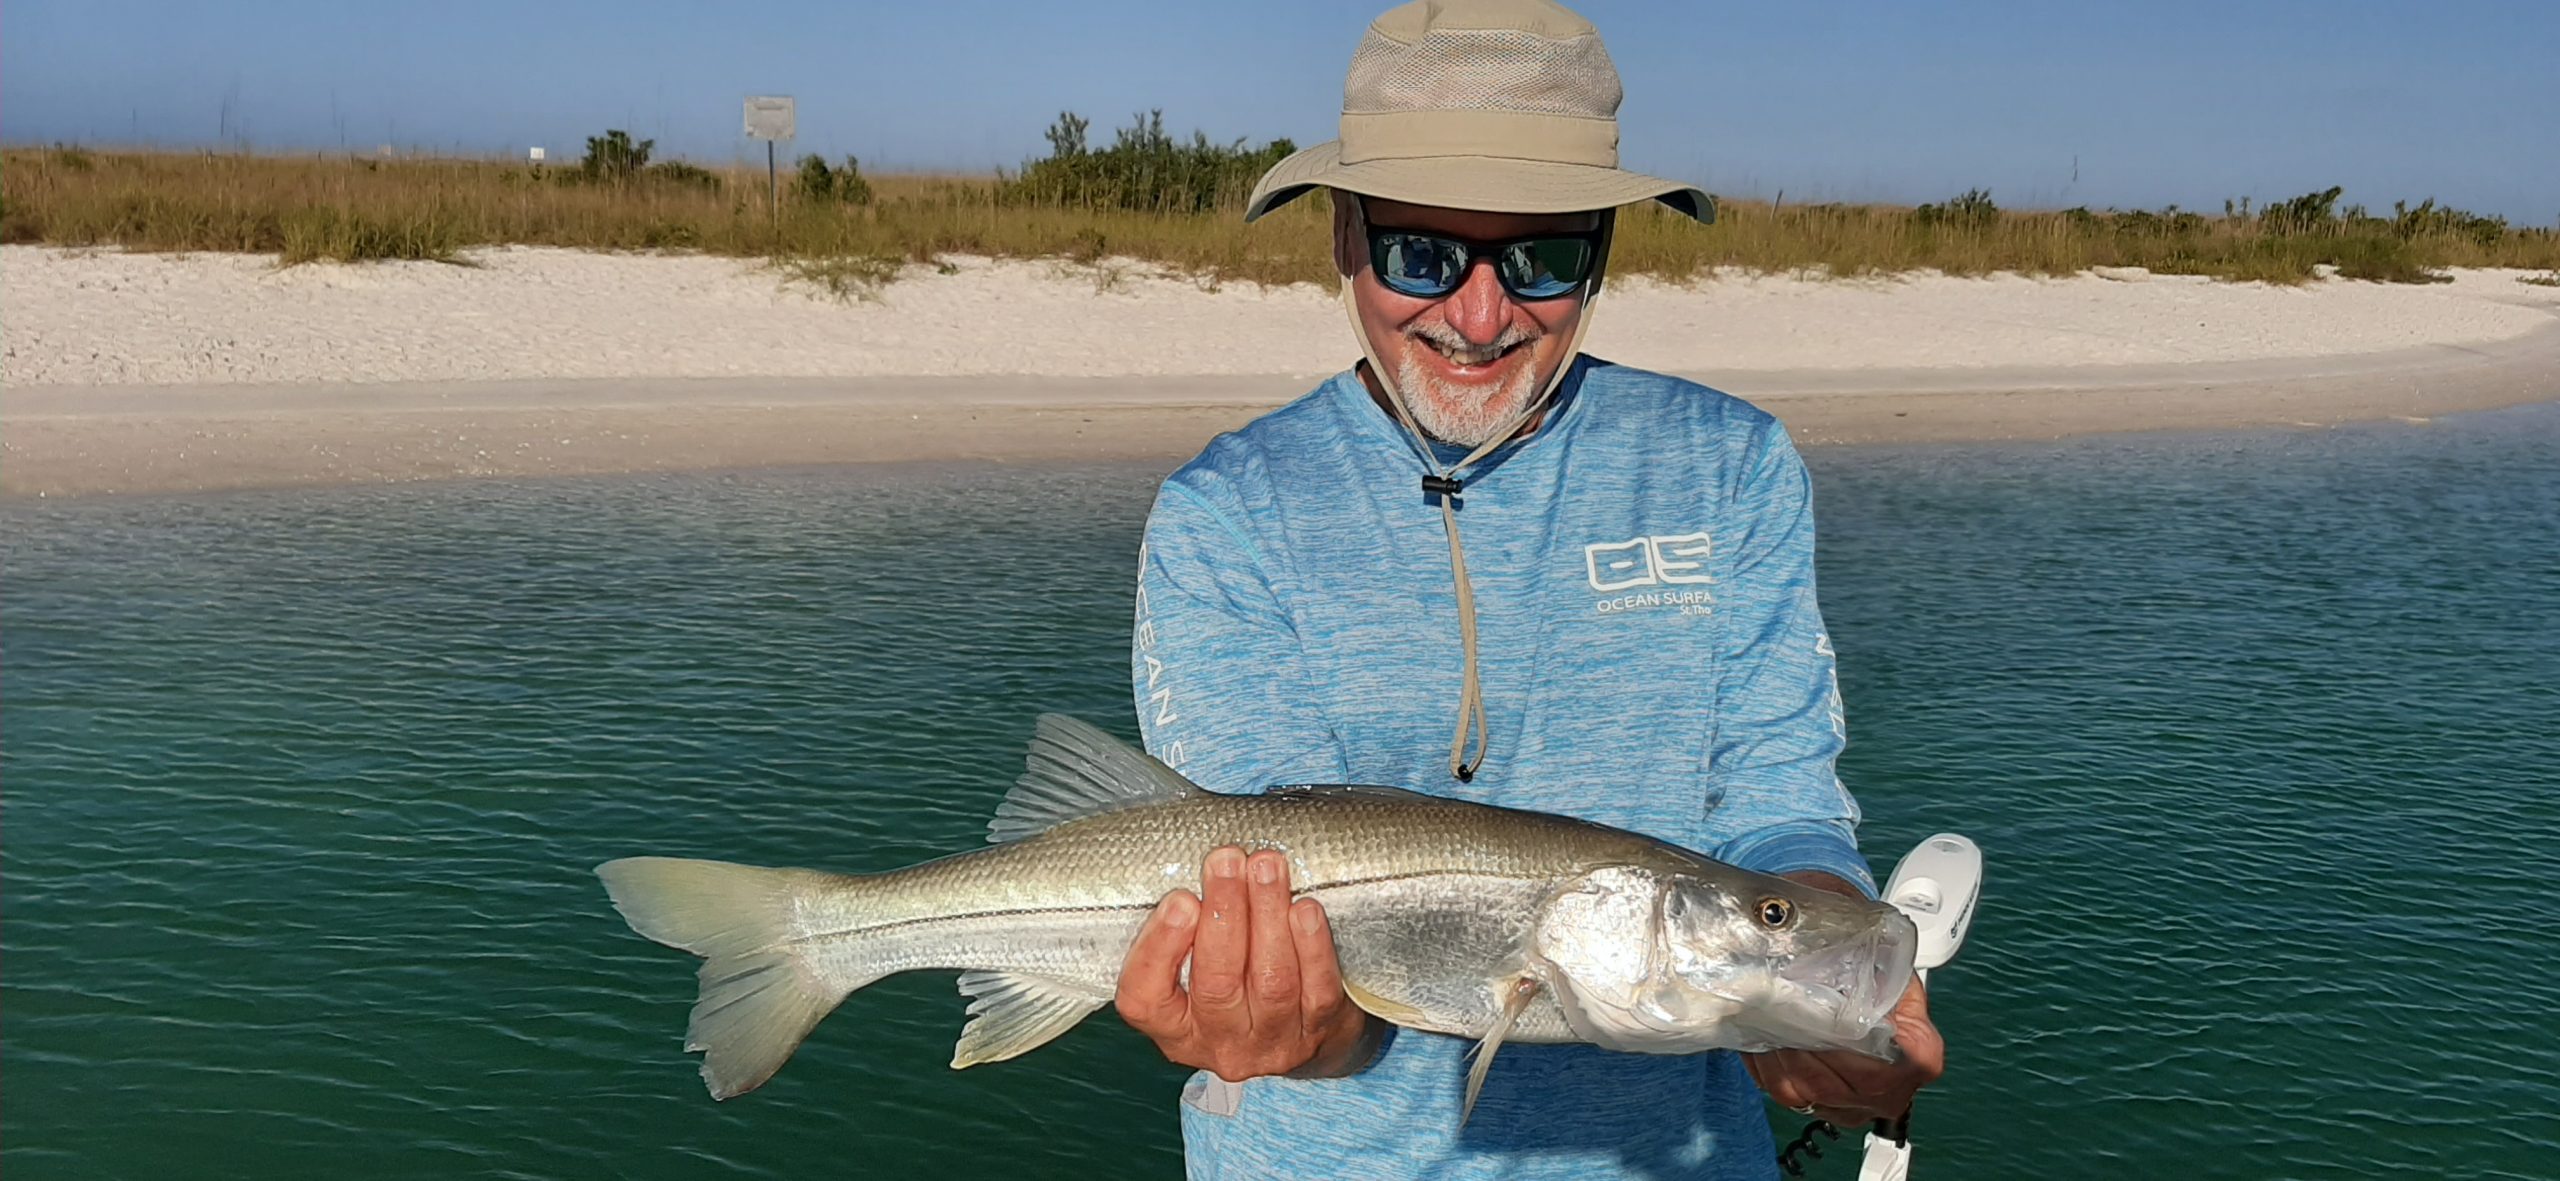 How to Fish for Snook: The Complete Guide